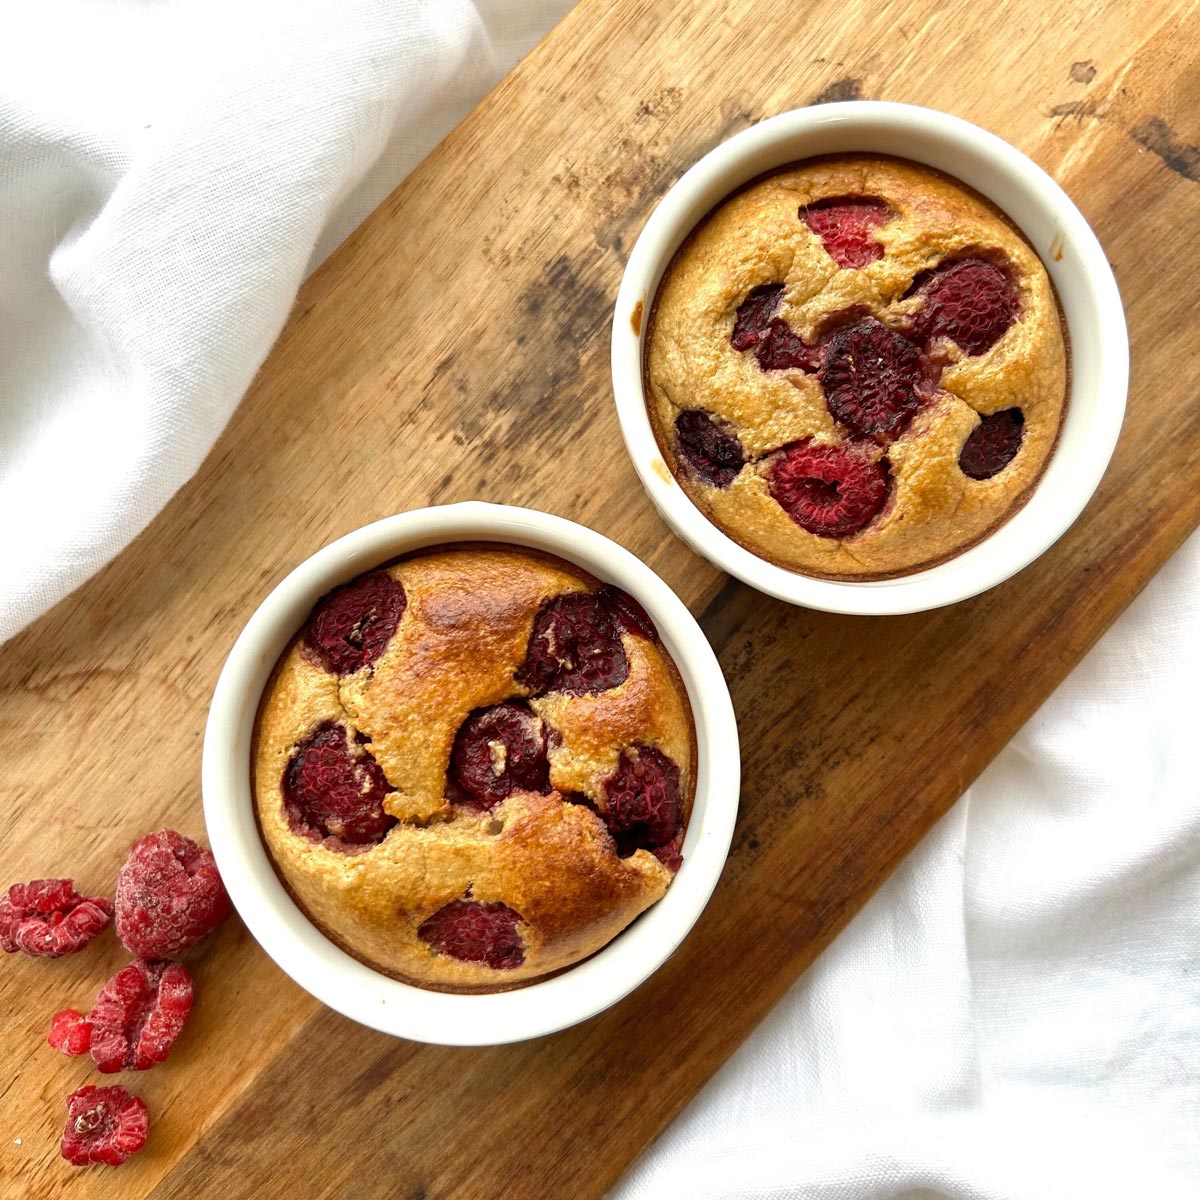 Raspberry & Coconut Protein Baked Oats